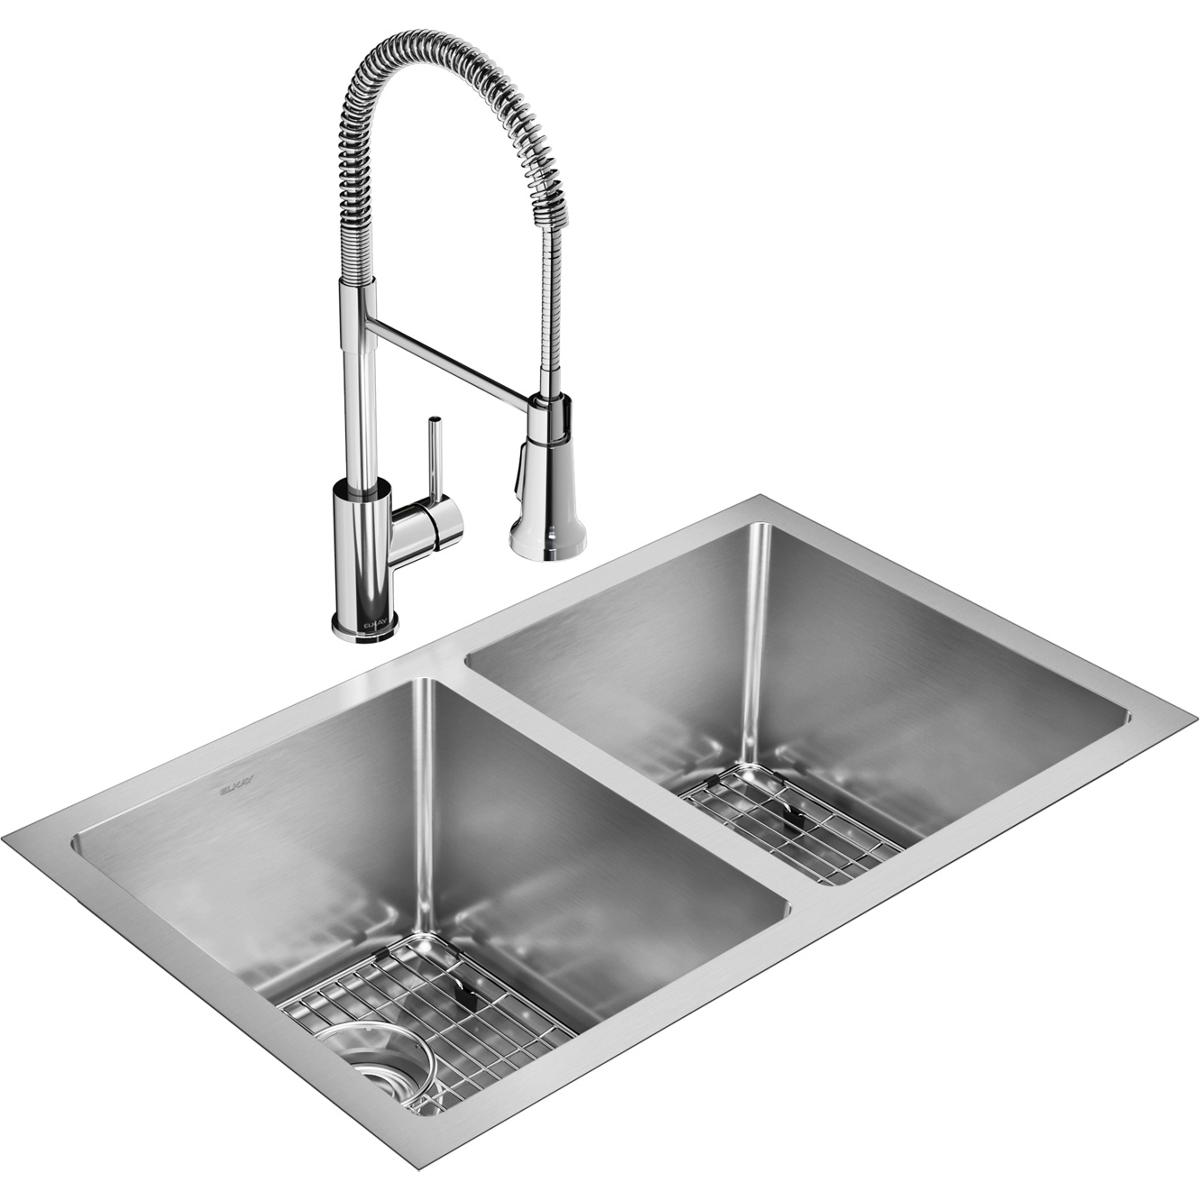 Elkay Crosstown 16 Gauge Stainless Steel, 30-3/4" x 18-1/2" x 10" Equal Double Bowl Undermount Sink Kit with Faucet-Kitchen Sink & Faucet Combos-Elkay